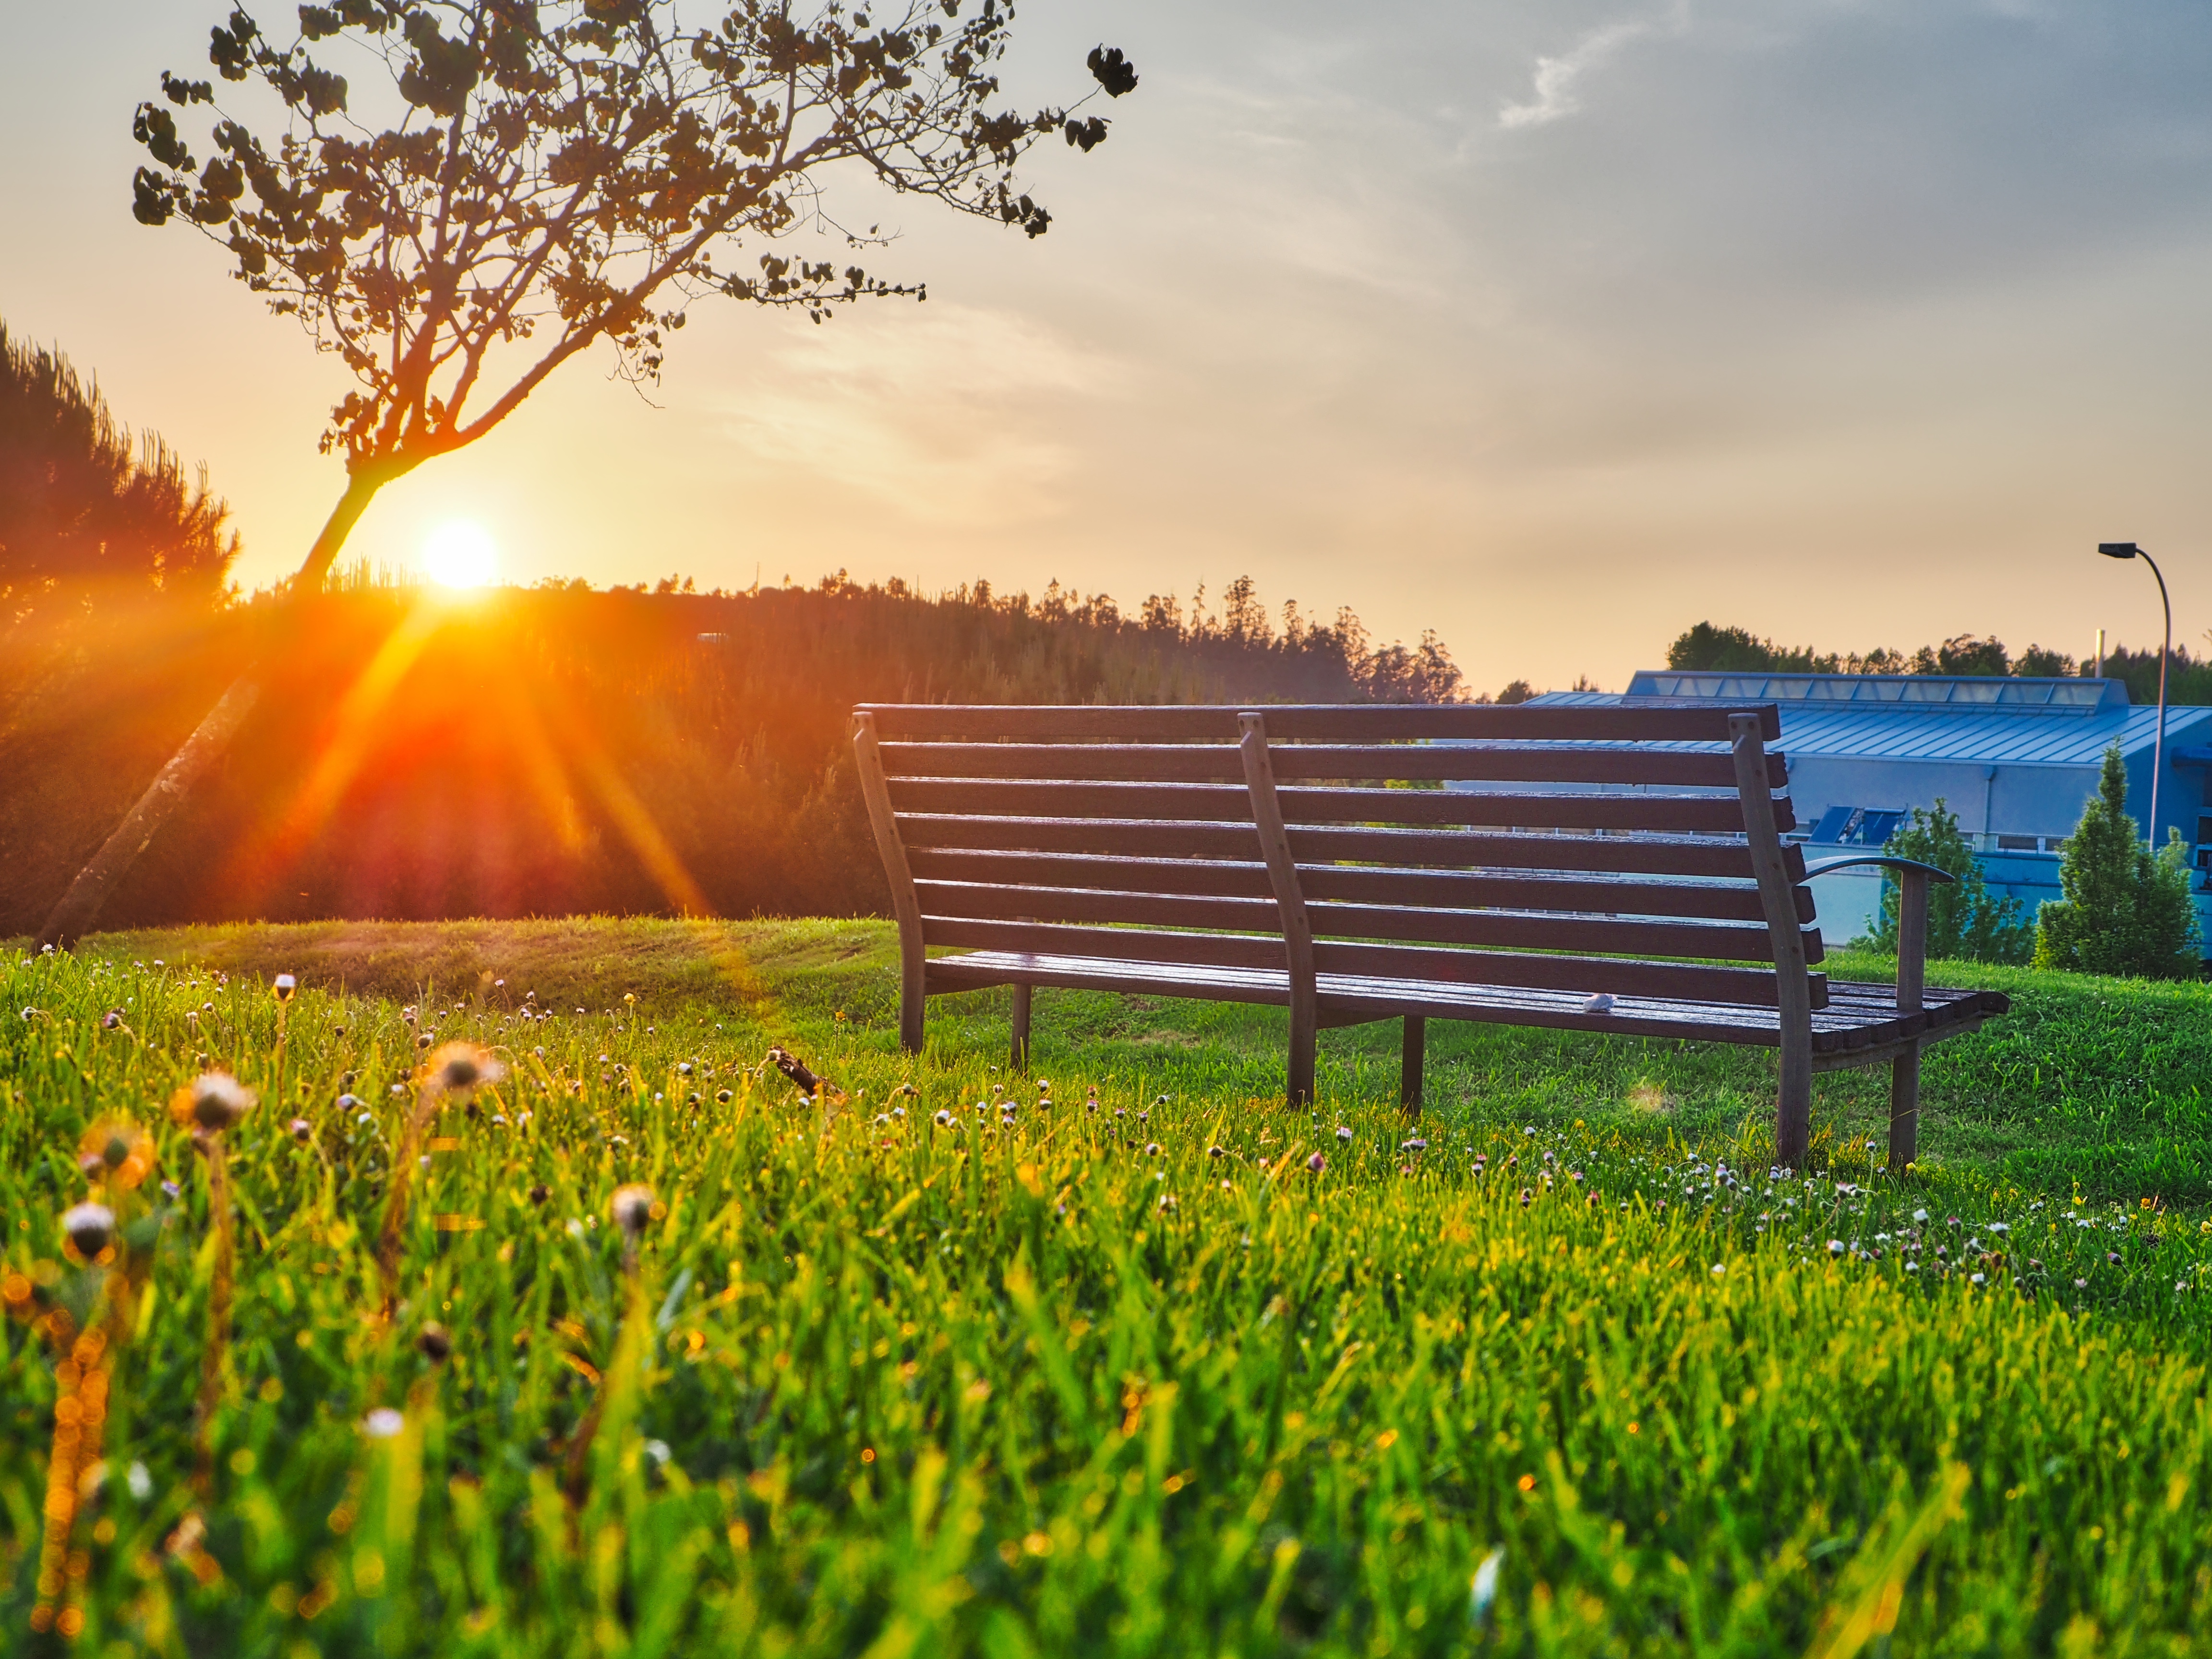 android park, sunlight, bench, nature, summer